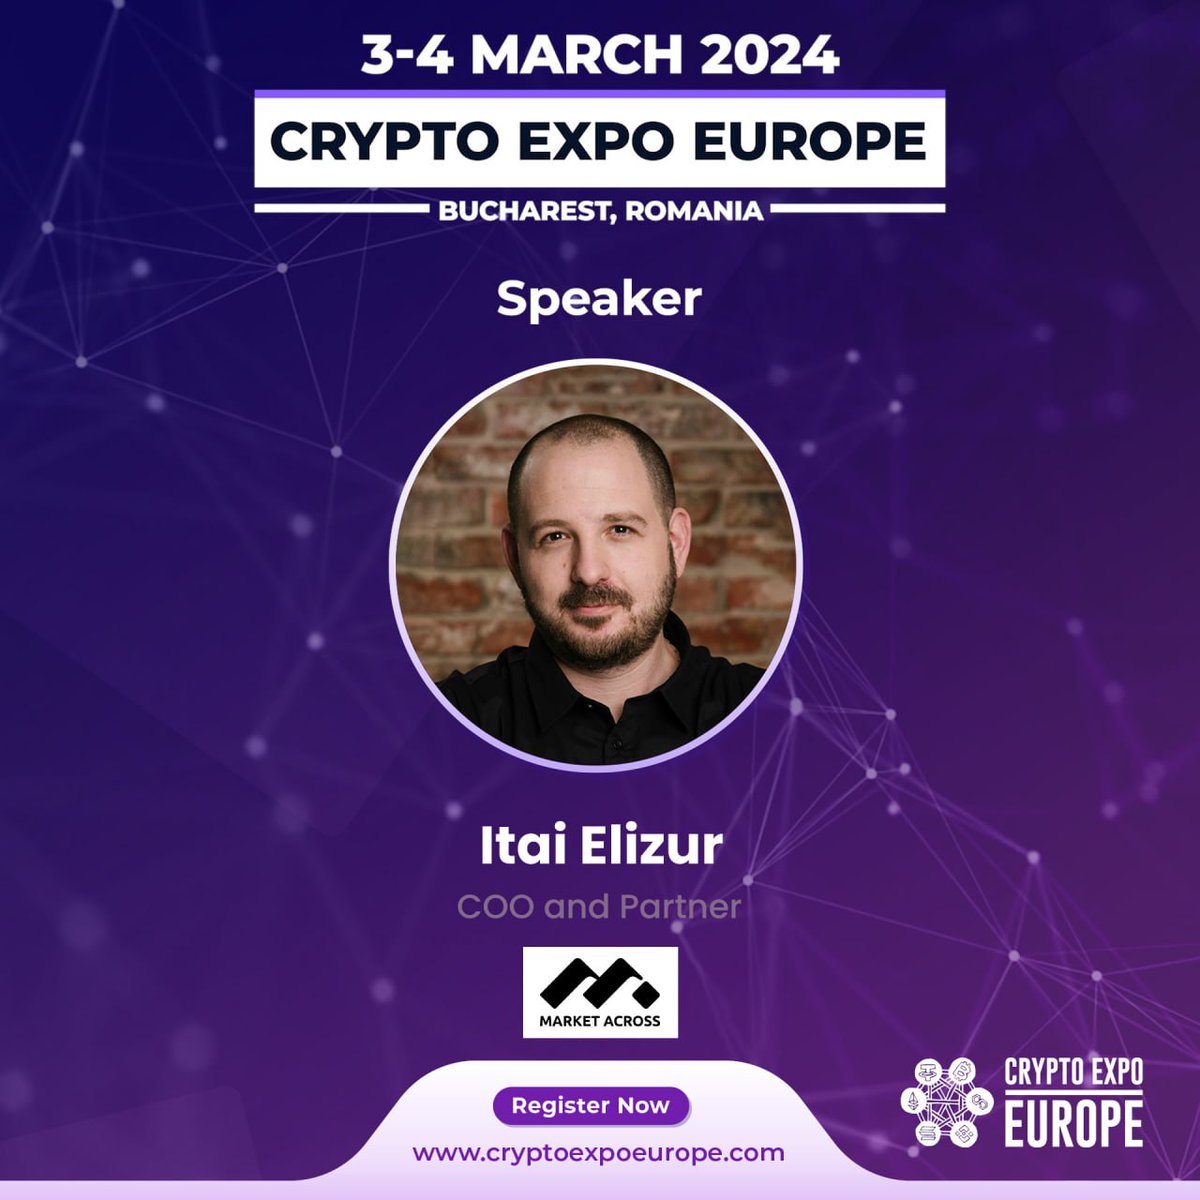 Headed to Bucharest next month to speak at @CryptoExpoEu, CEE's top #Web3 Event, with the killer @MarketAcross and @Chainwire team who will be managing the press and comms for the event. Around Bucharest next month for CEE? Hit me up